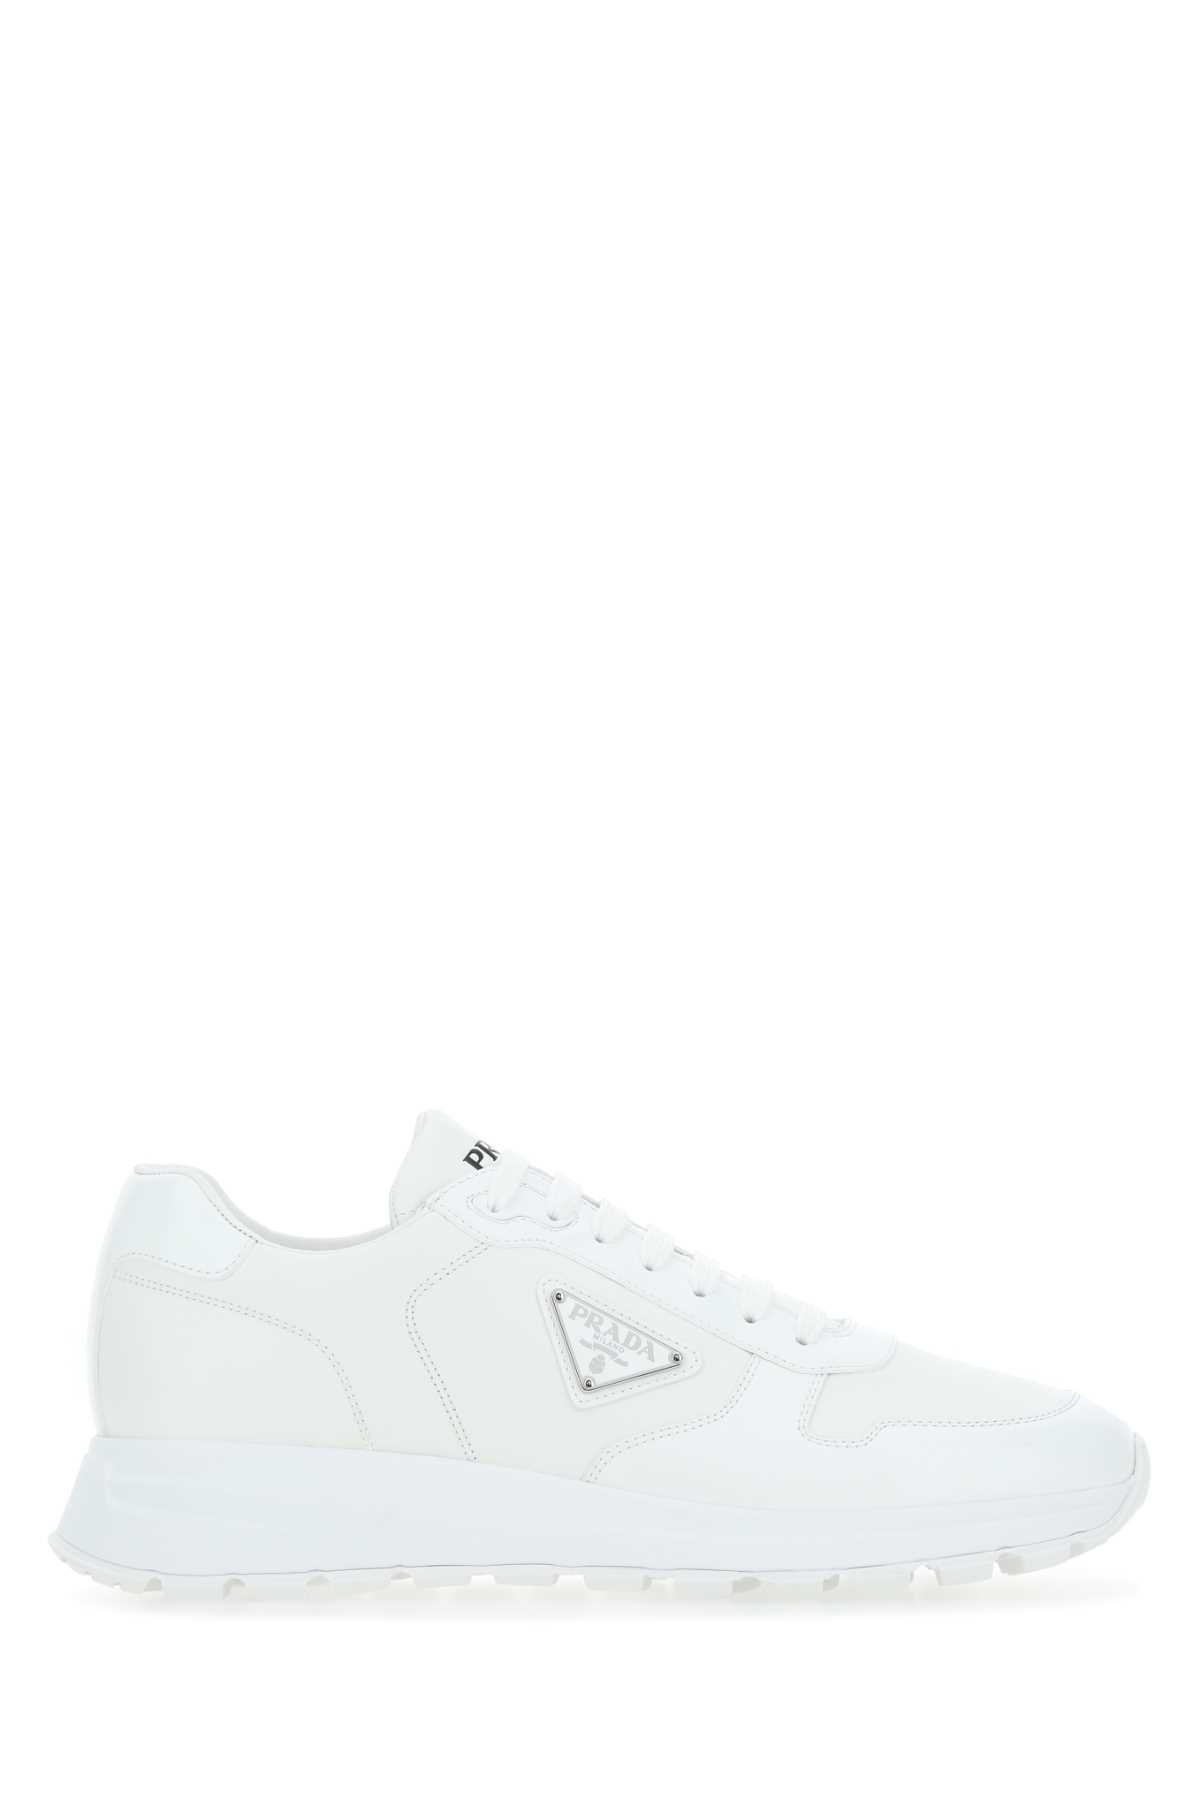 Prada White Re-nylon And Leather Sneakers In Bianco